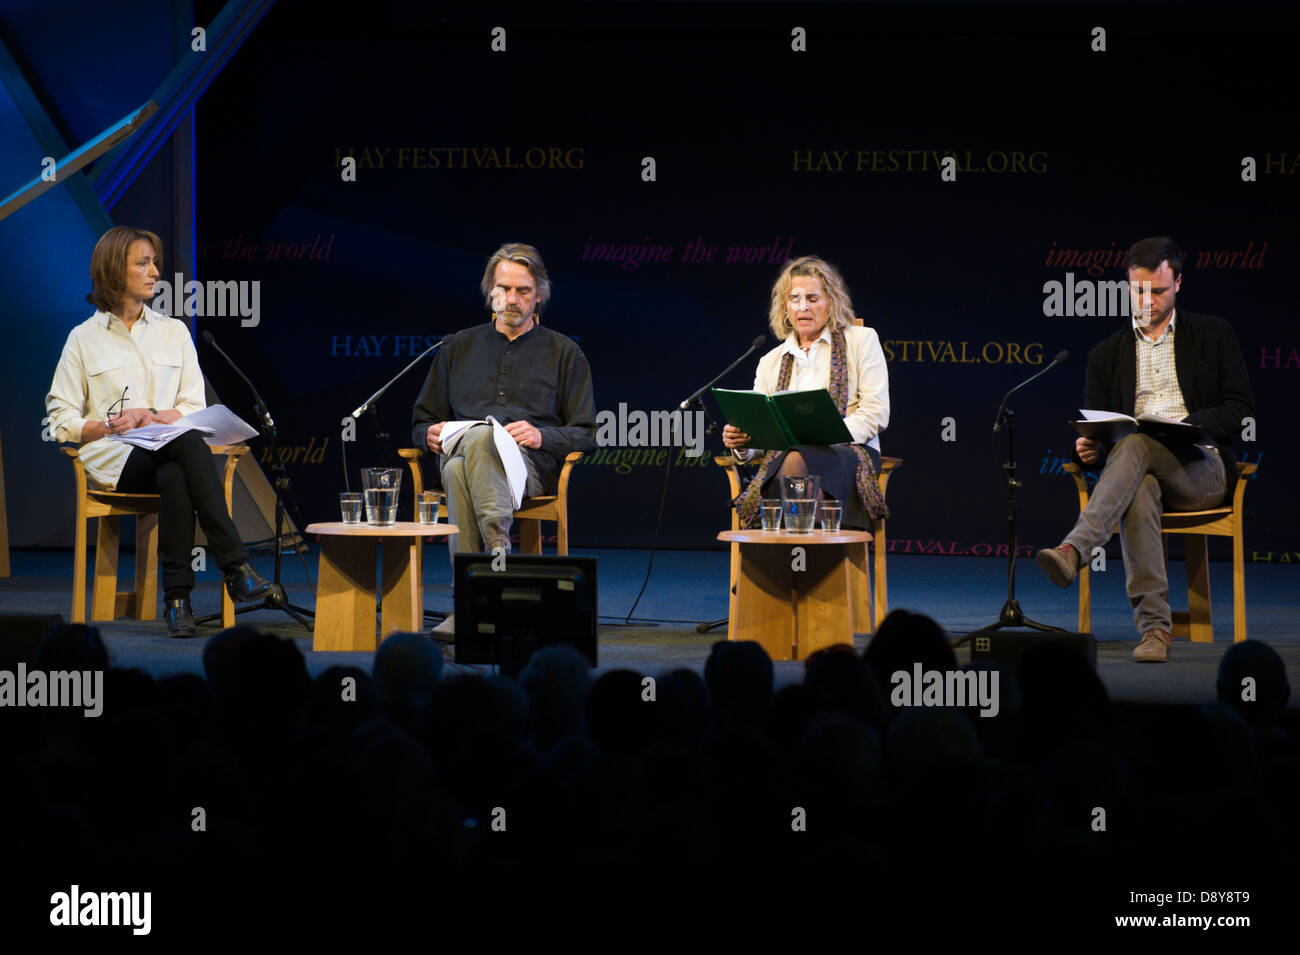 Actors reading poetry of The Great War on stage at Hay Festival 2013 Hay on Wye Powys Wales UK Stock Photo